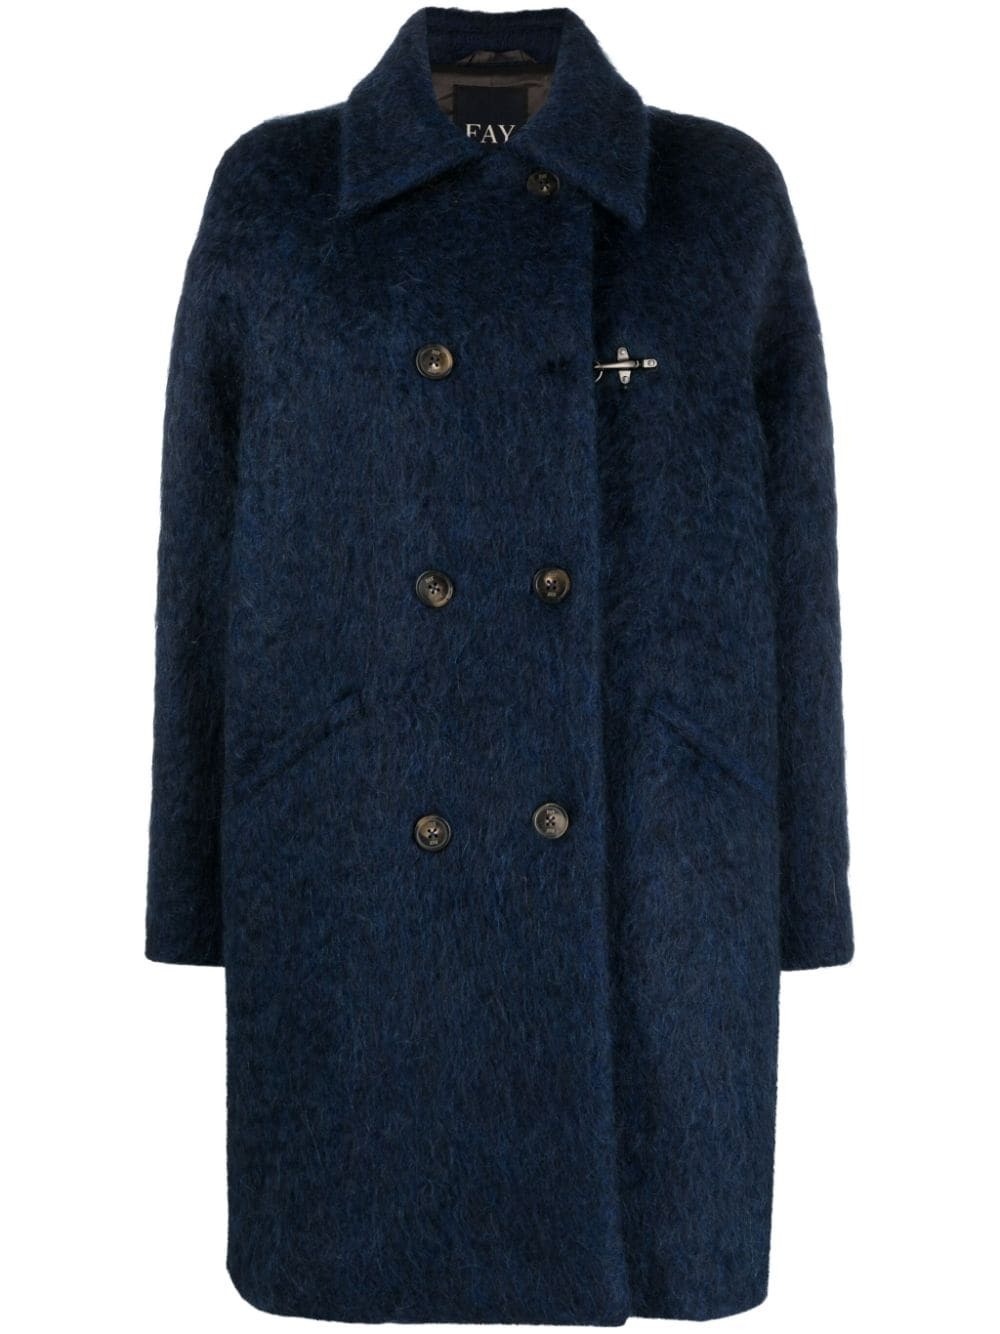 Photo: FAY - Double-breasted Wool Blend Coat